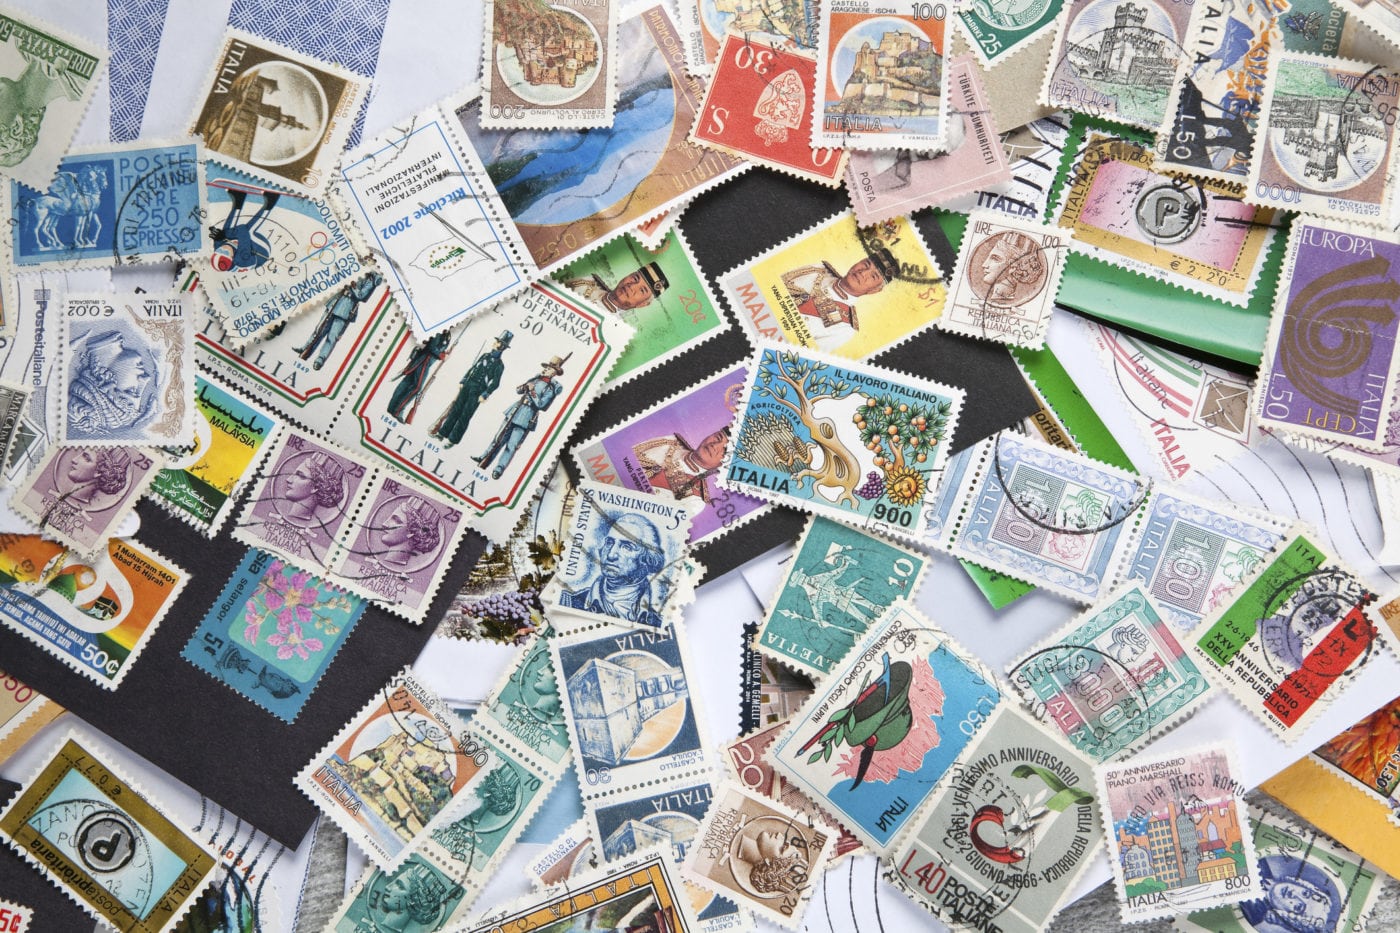 Postage will go down for many newspapers next year